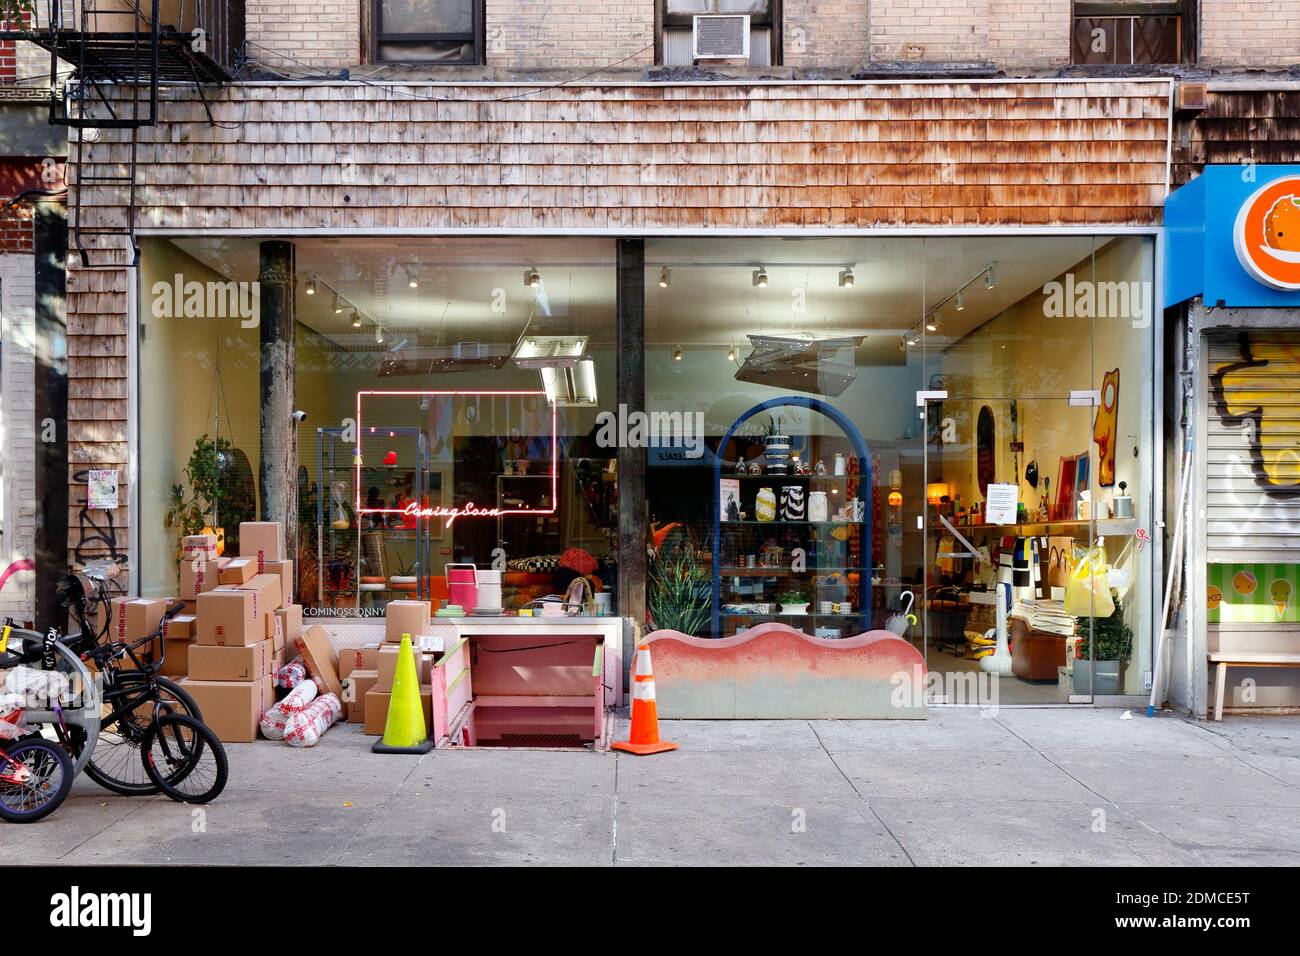 [historical storefront] Coming Soon, 37 Orchard St, New York, NYC storefront photo of a chic designer home store in the Lower East Side. Stock Photo